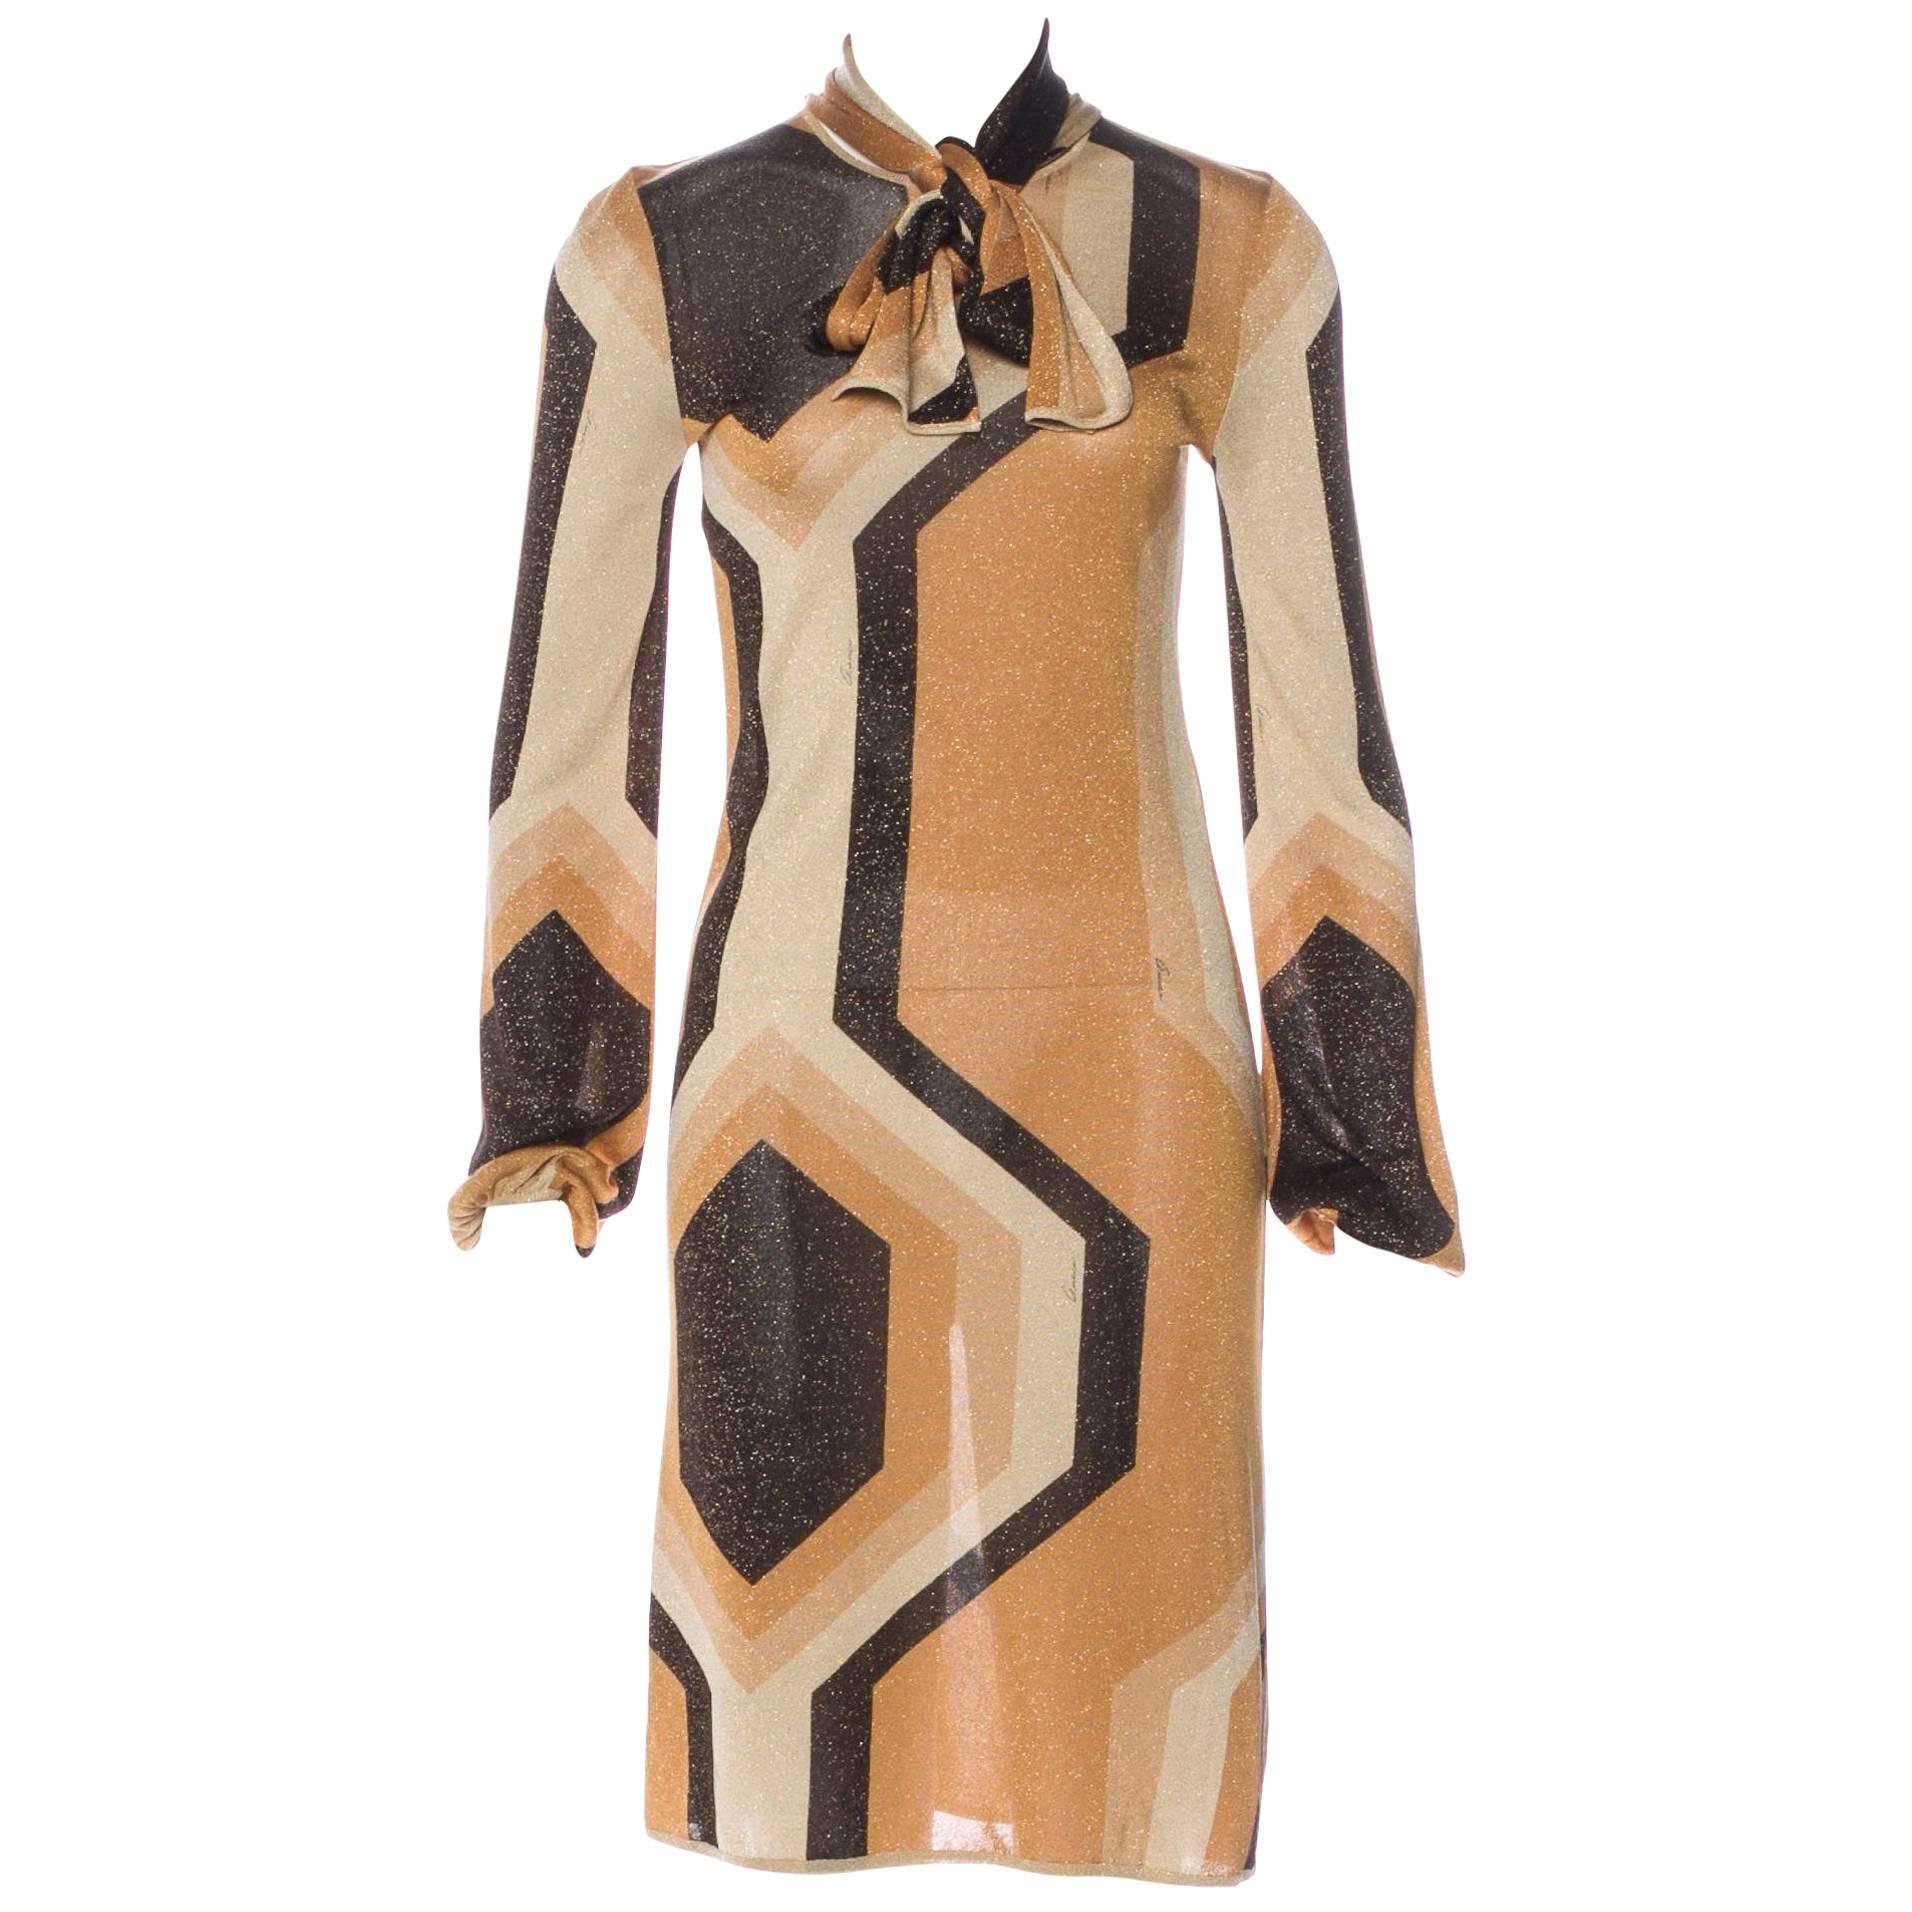 Gucci by Tom Ford Fall 2000 Gold Geometric Print Dress with Pussy Bow For Sale